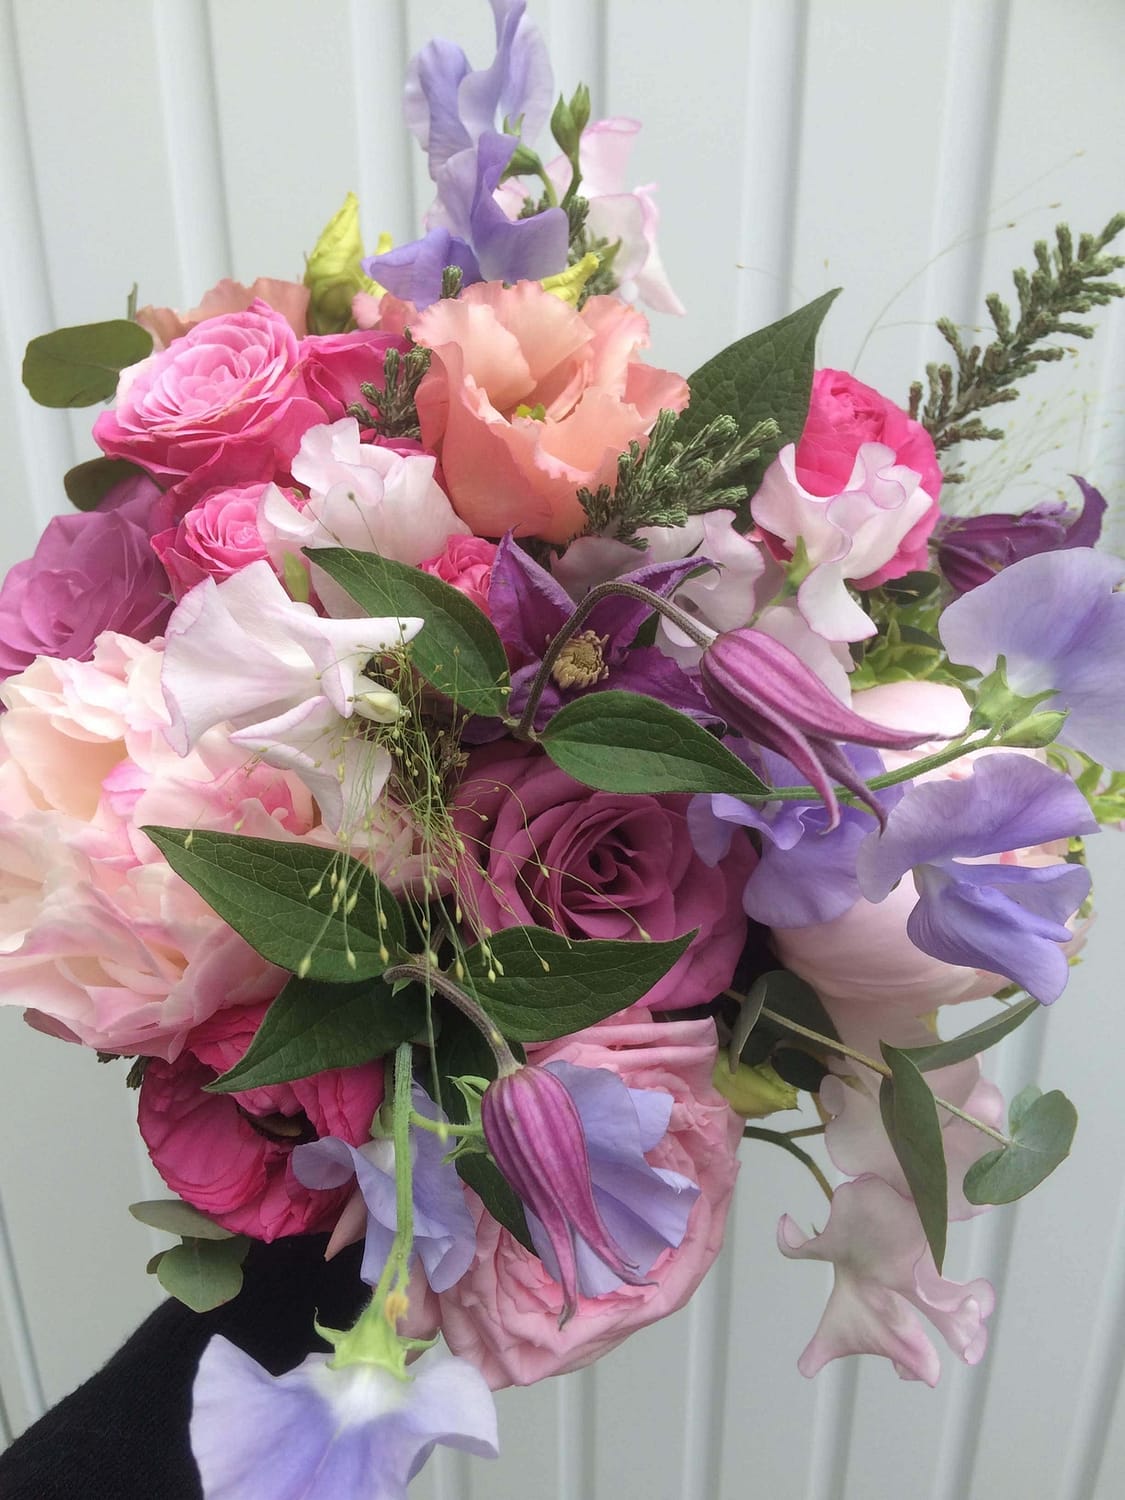 pink and purple bouquet with peonies, roses, sweet peas, clematis and lisianthus